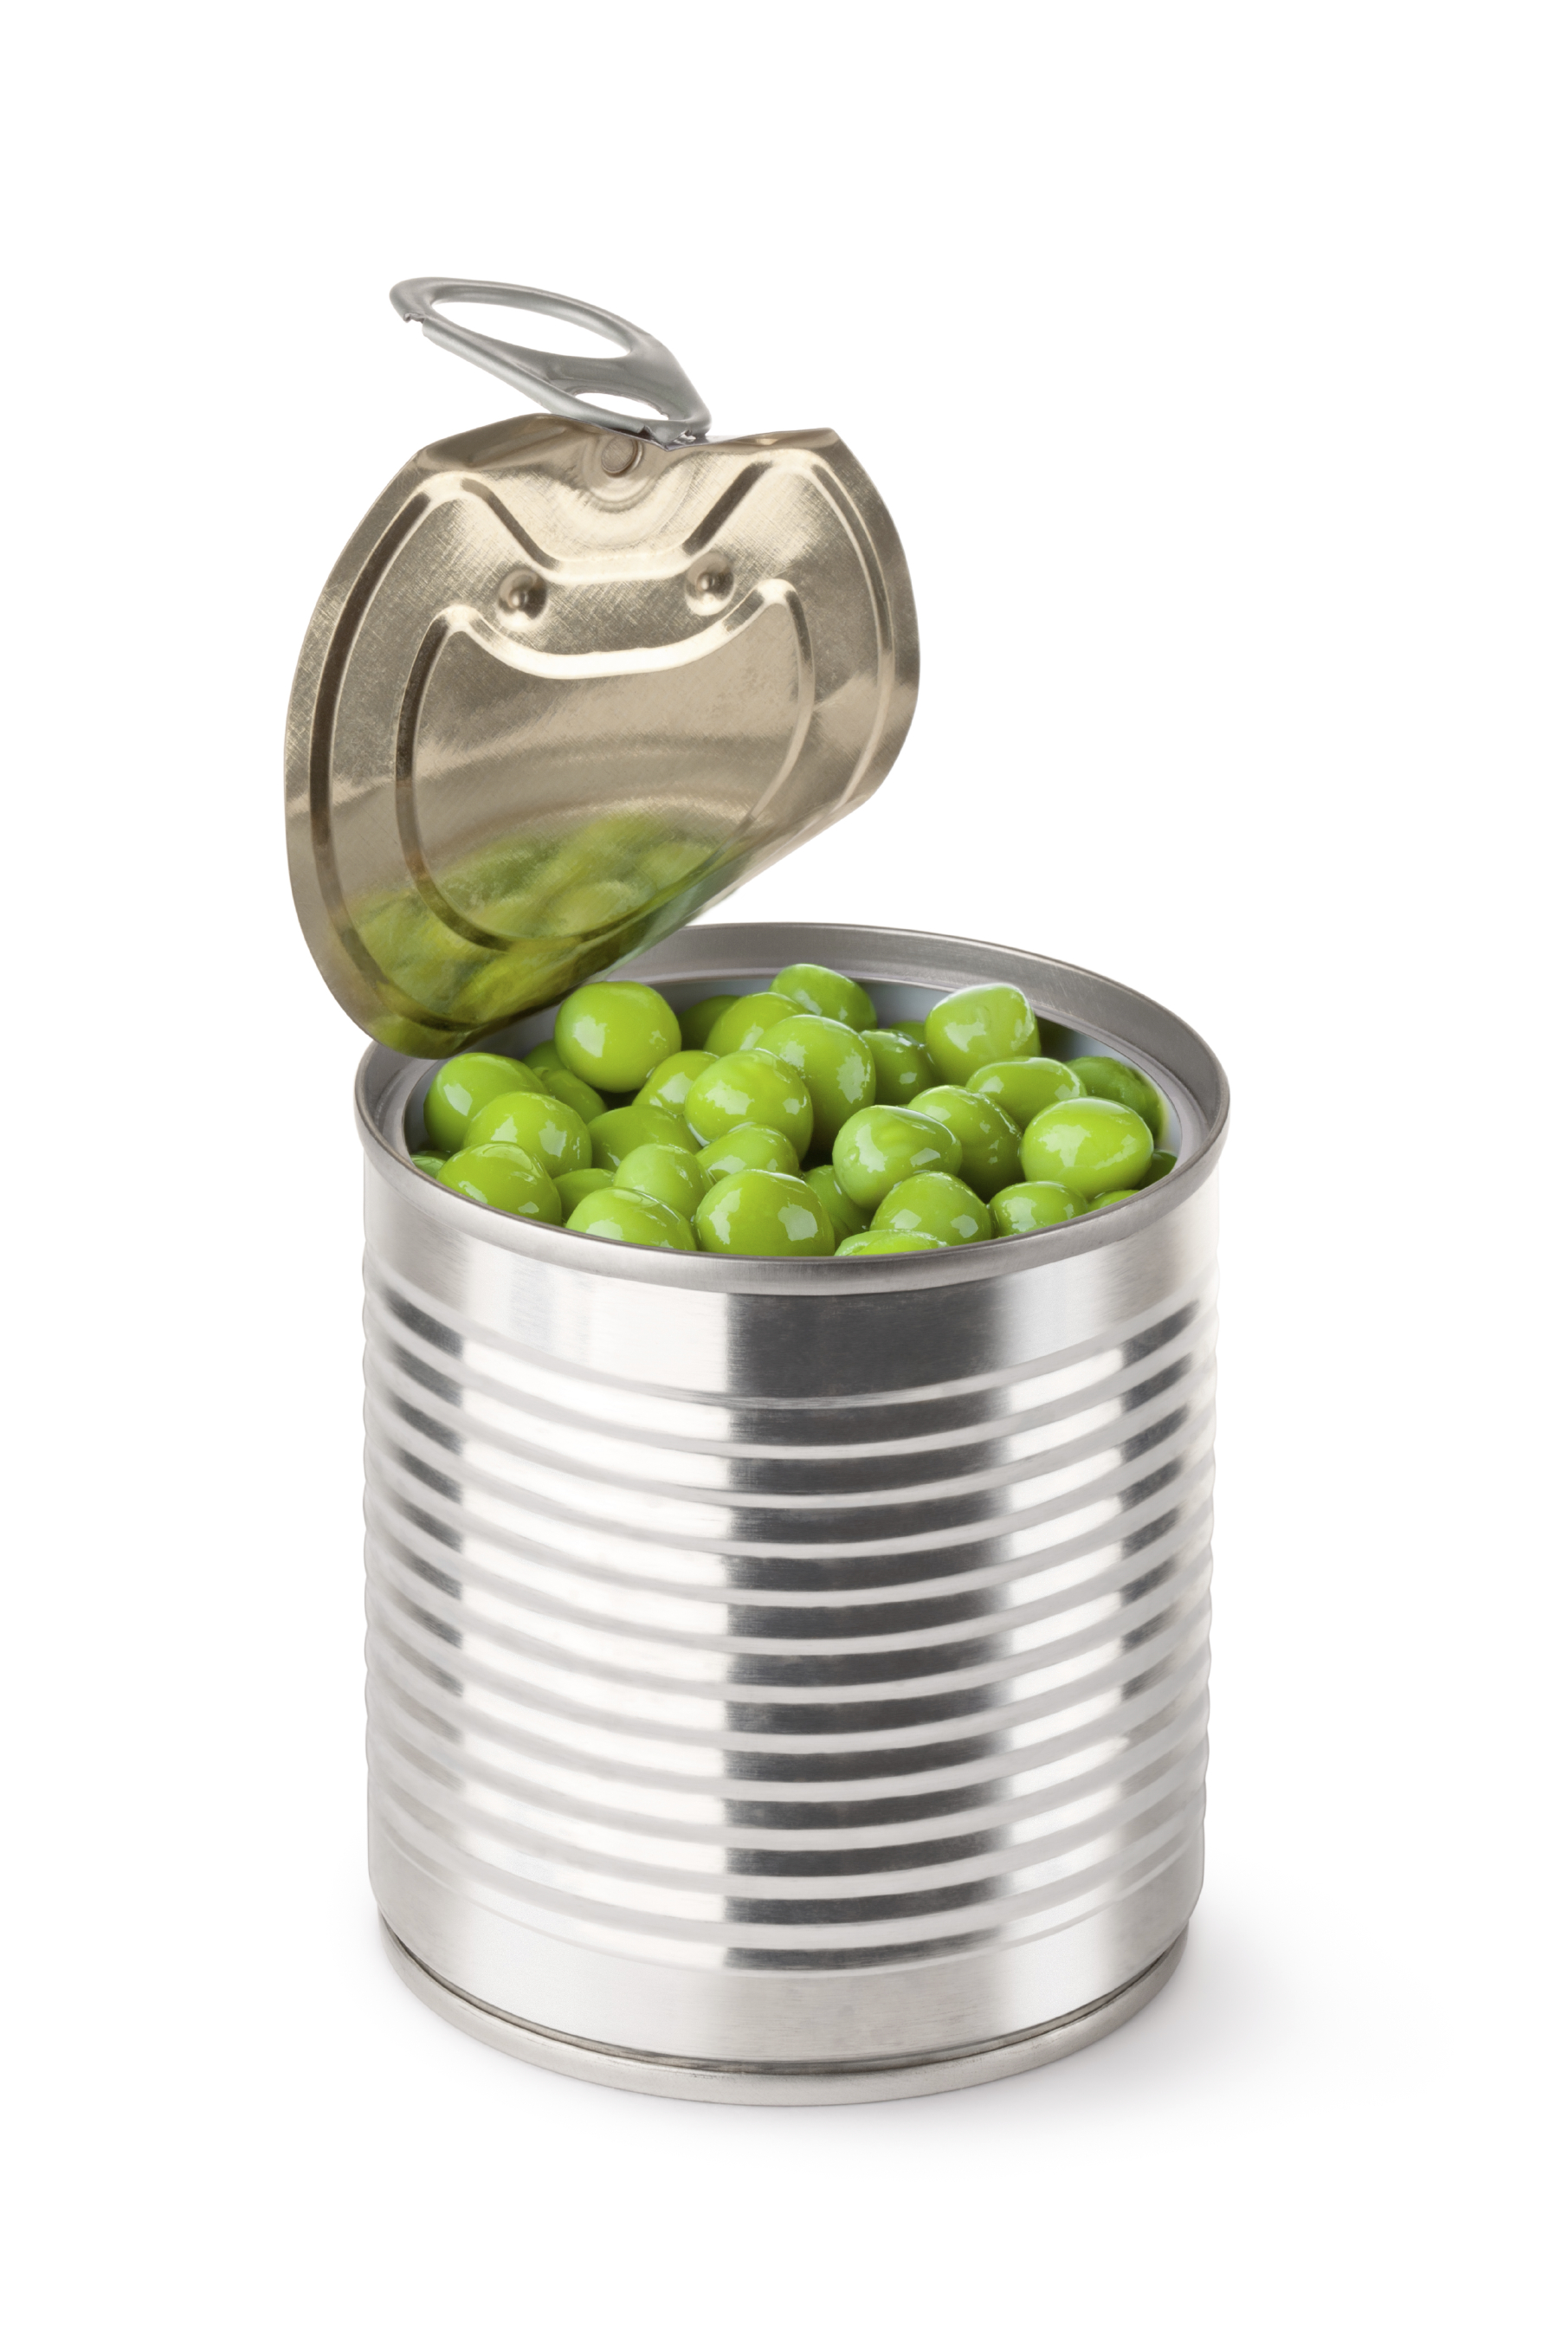 Is There BPA In Your Food? This Simple Tool Can Tell You